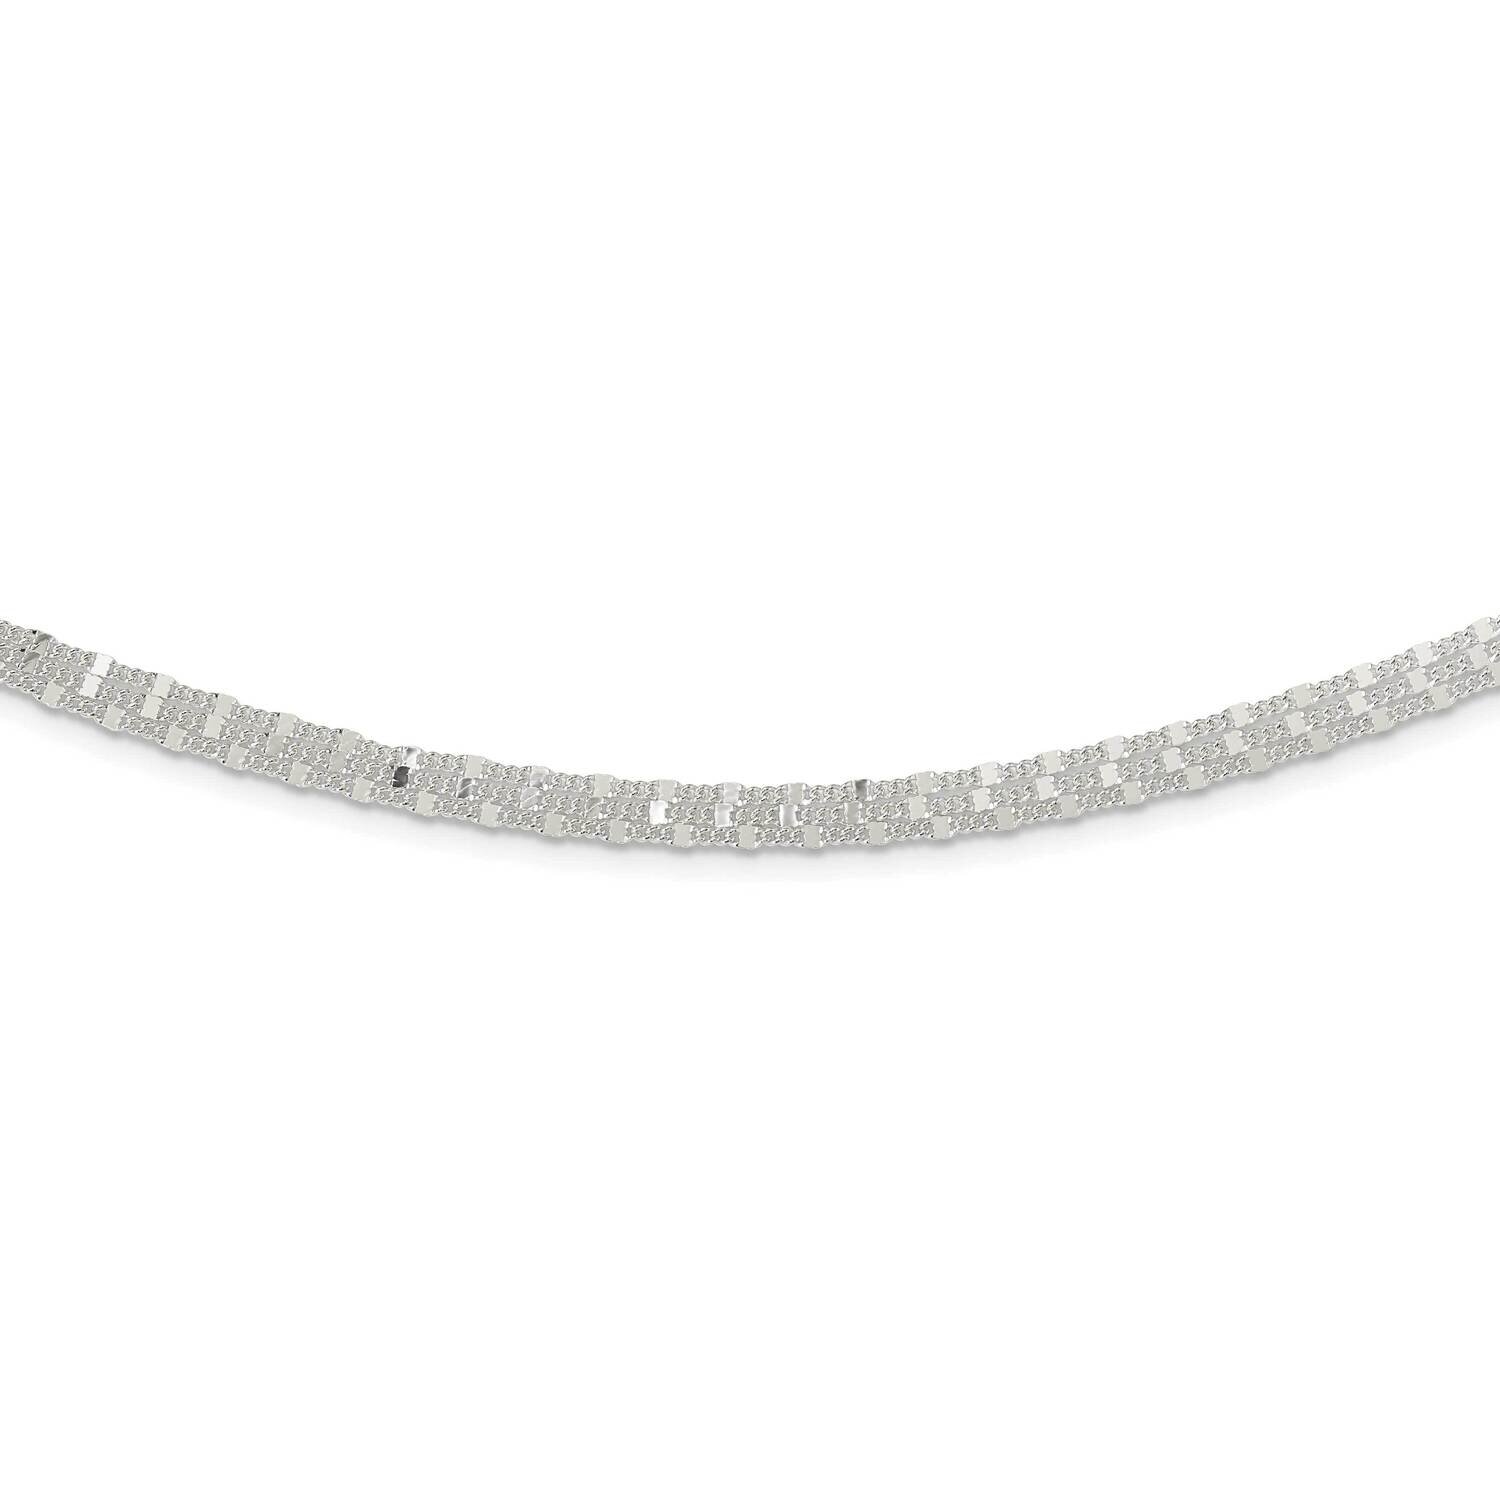 3-Strand Necklace 18 Inch Sterling Silver Polished QG5979-18